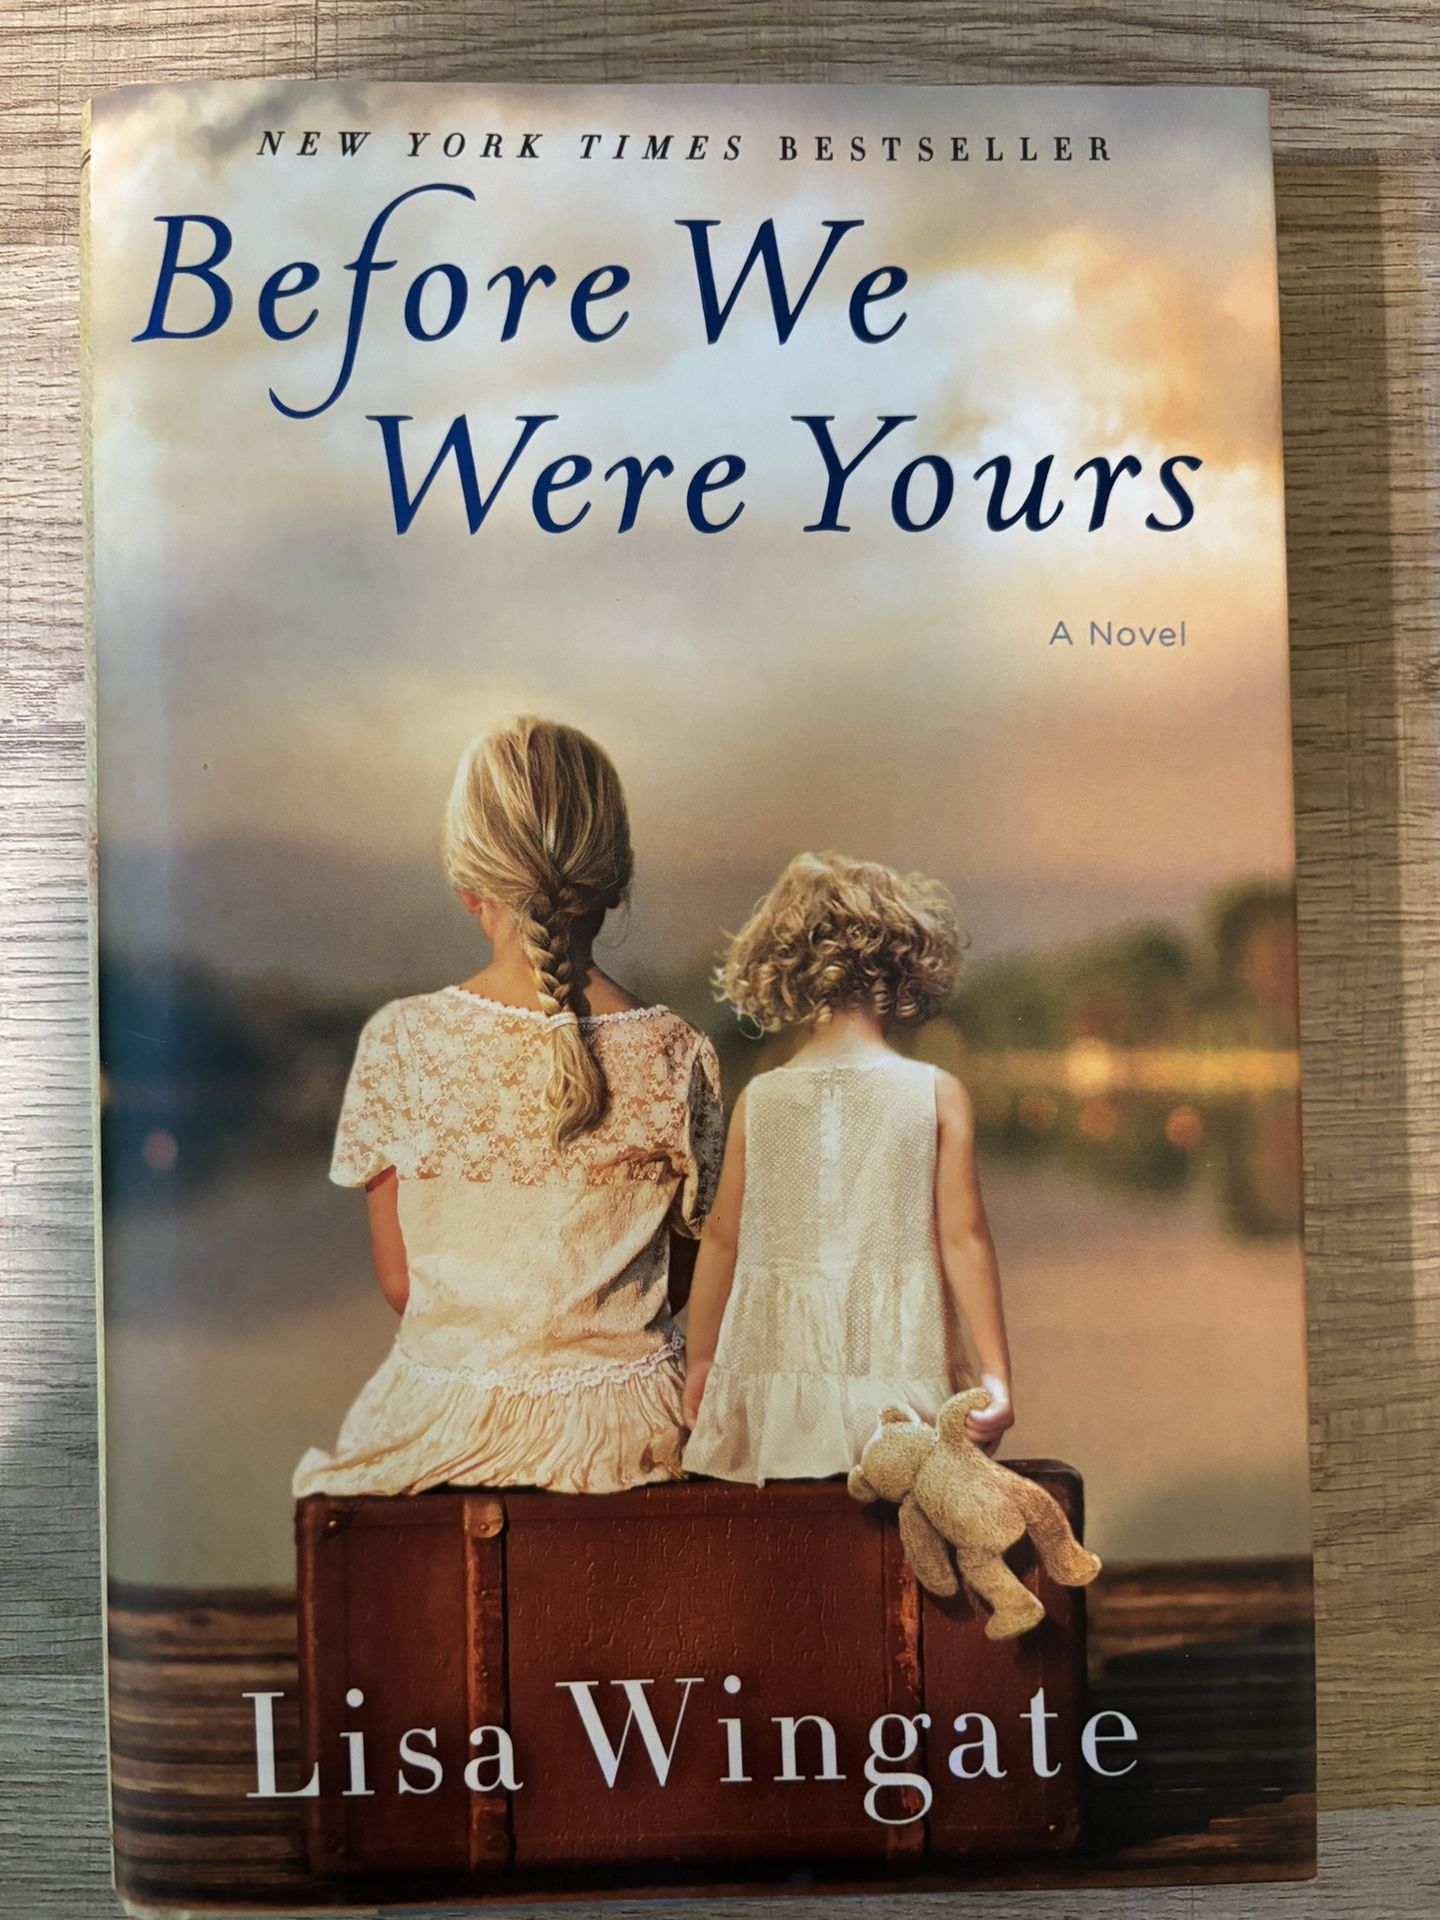 Before We Were Yours. New Hardcover